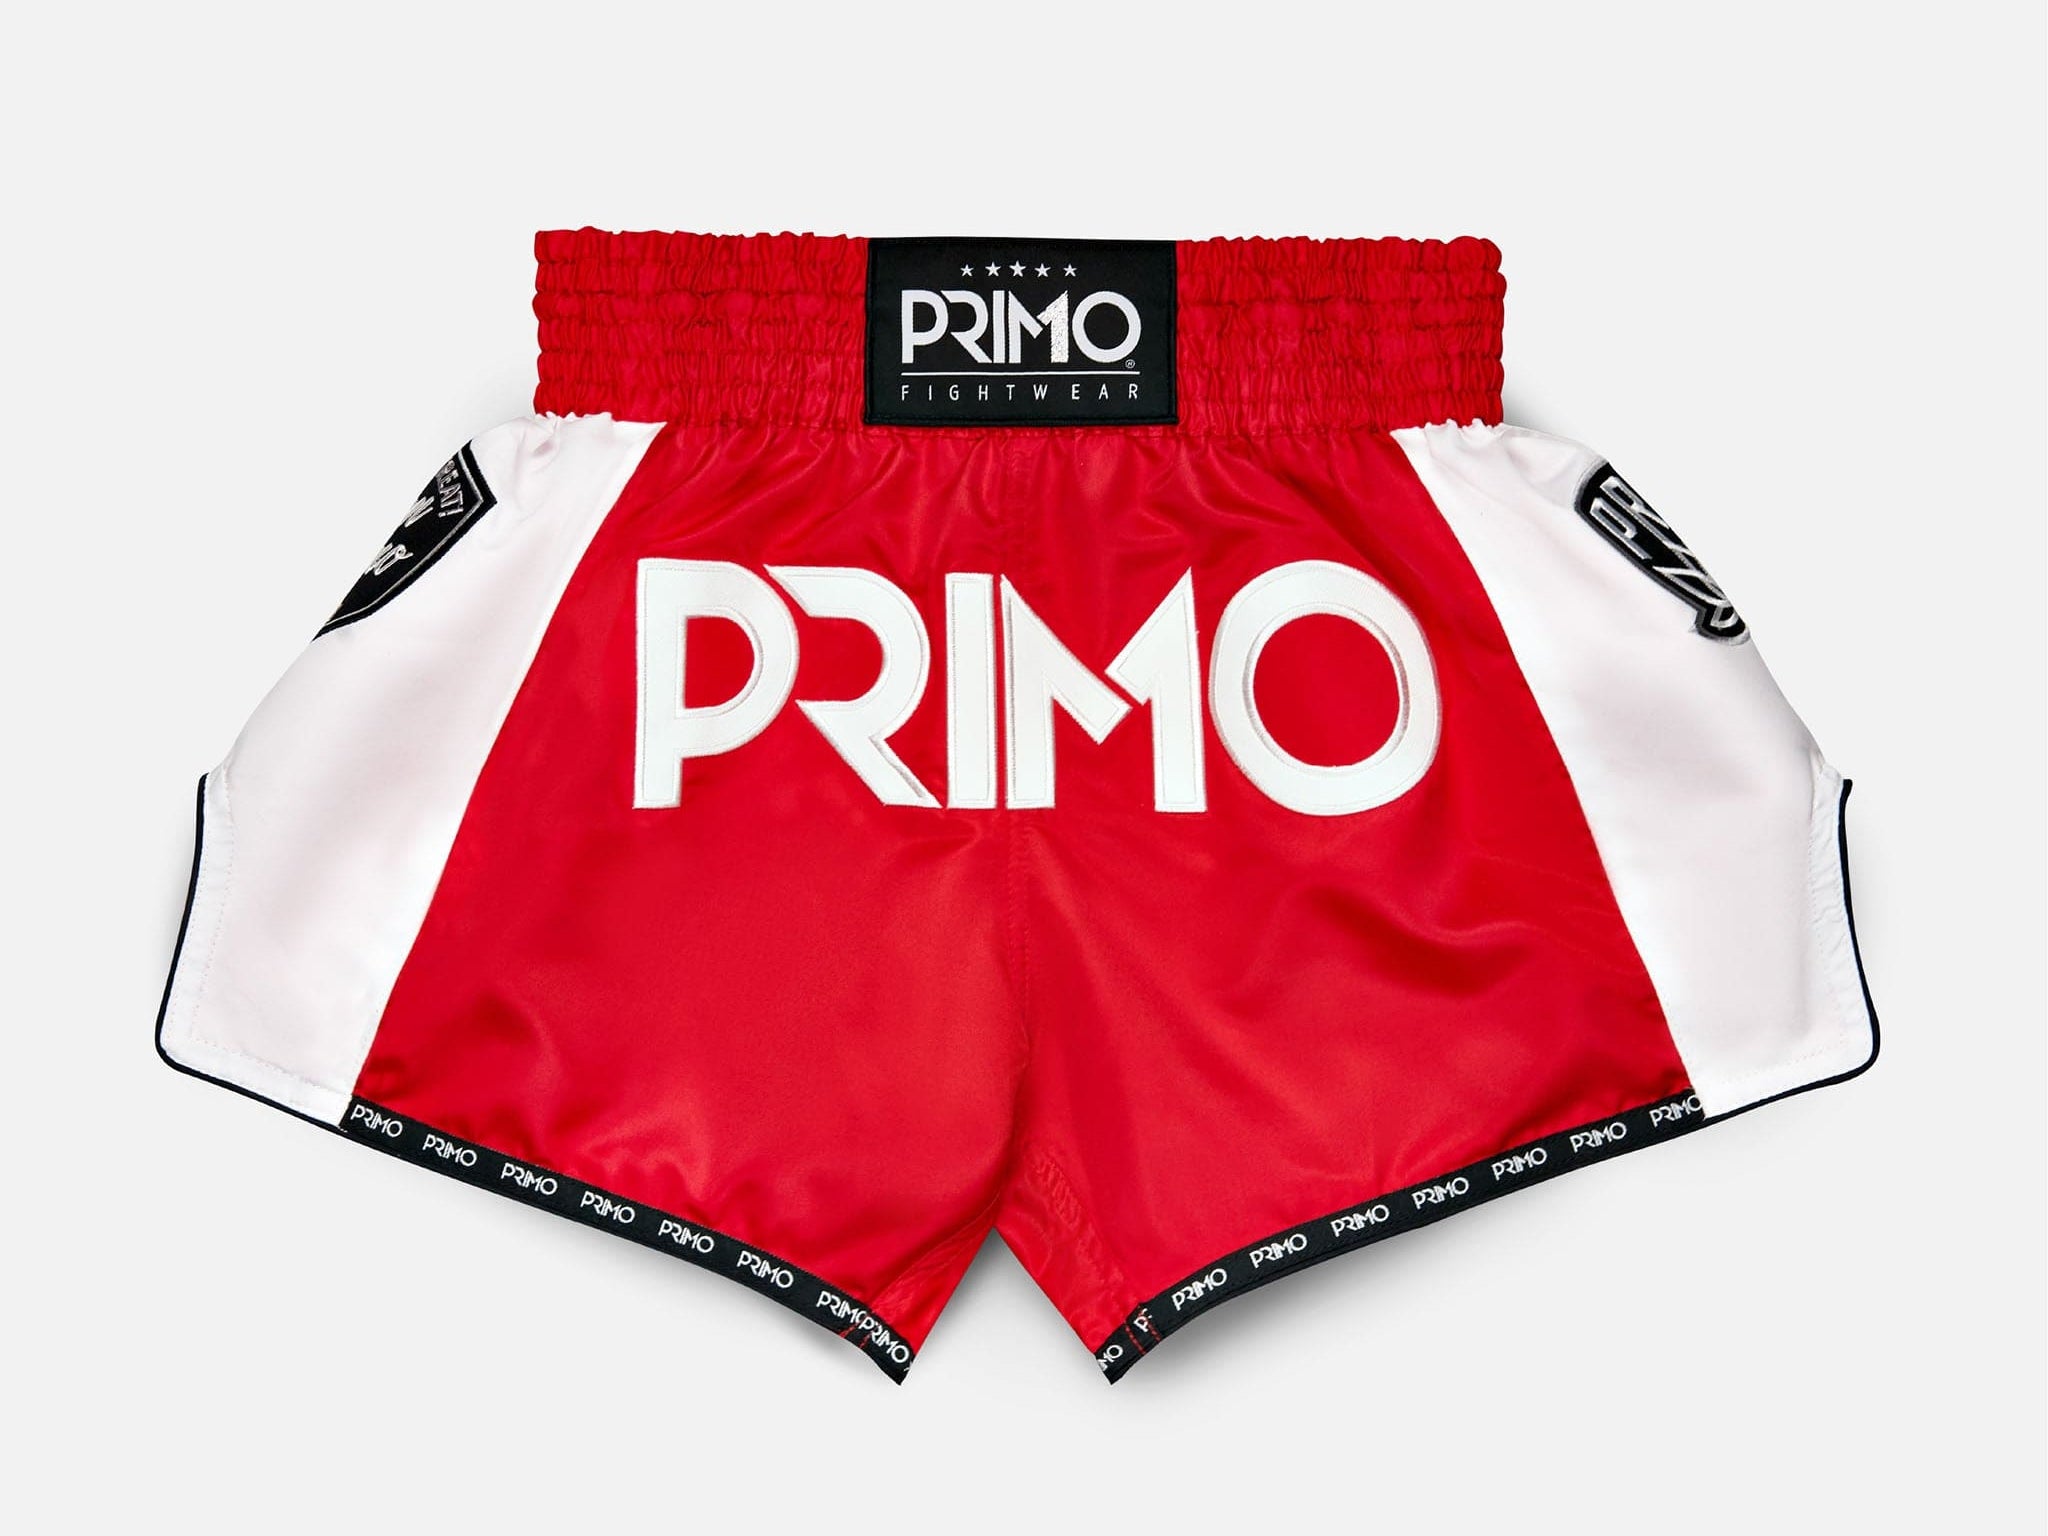 Primo Fight Wear Official Muay Thai Shorts - Free Flow Series - Stadium Classic Red